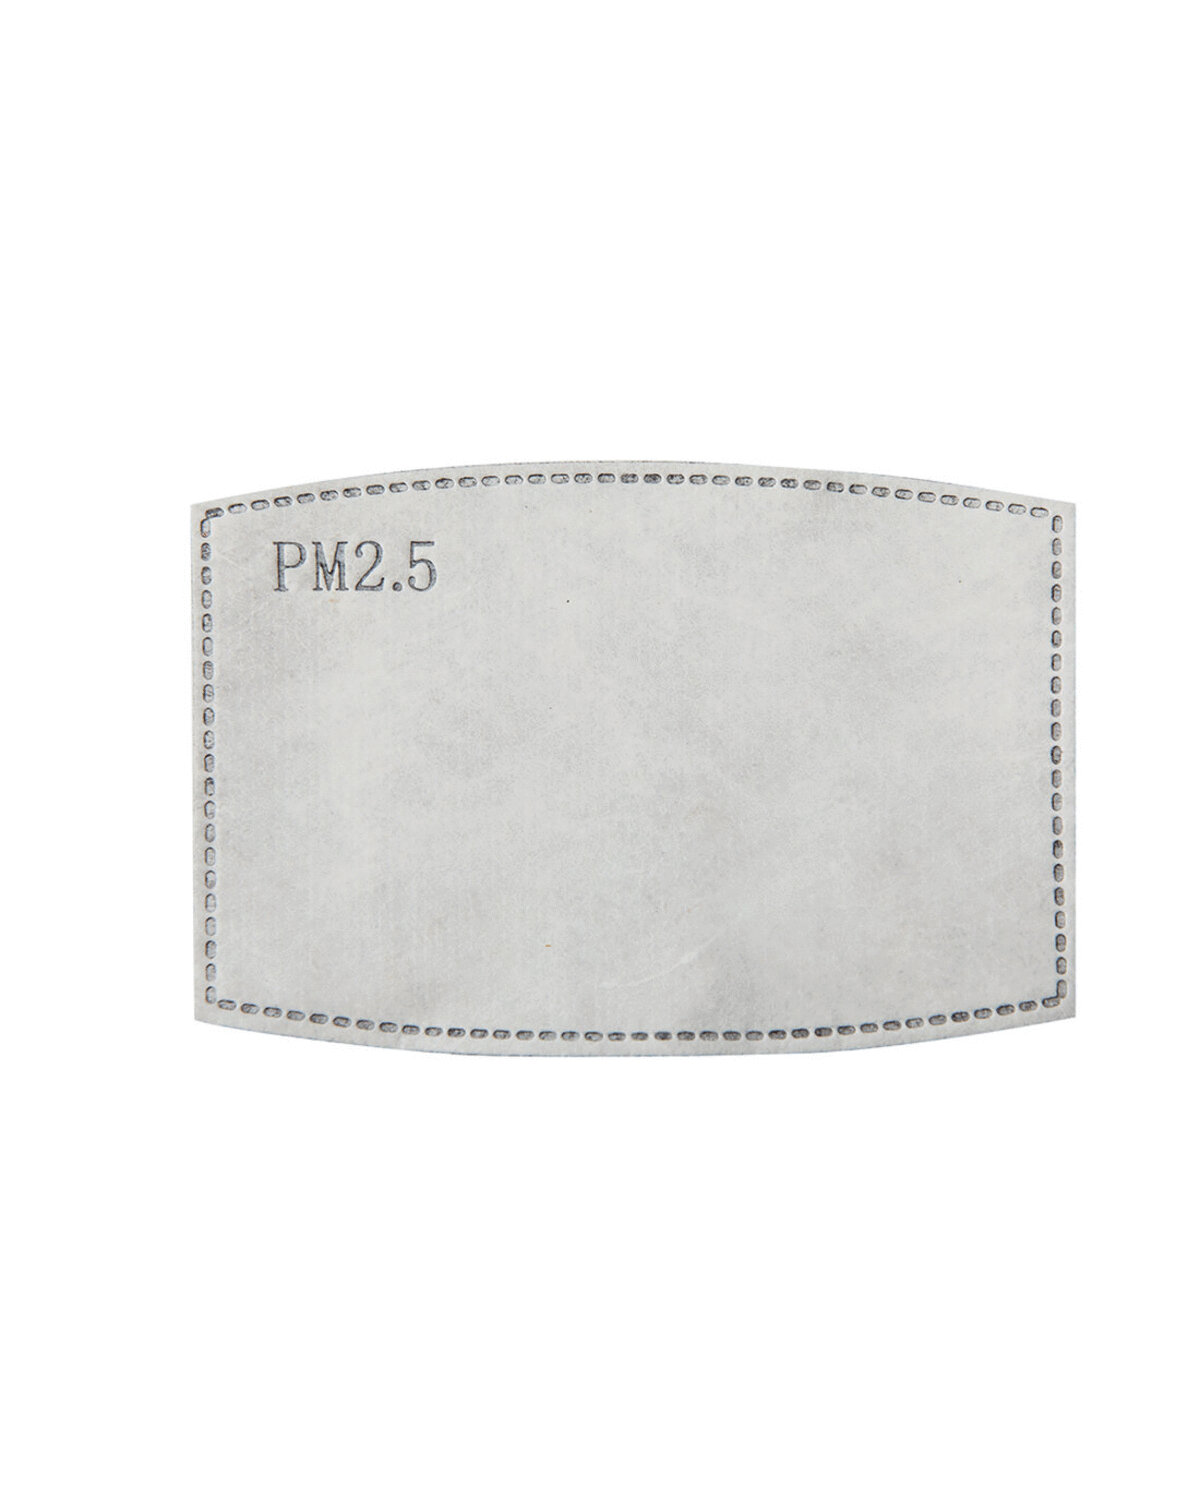 PM2.5 ACTIVATED CARBON FILTER (PACK OF 10)